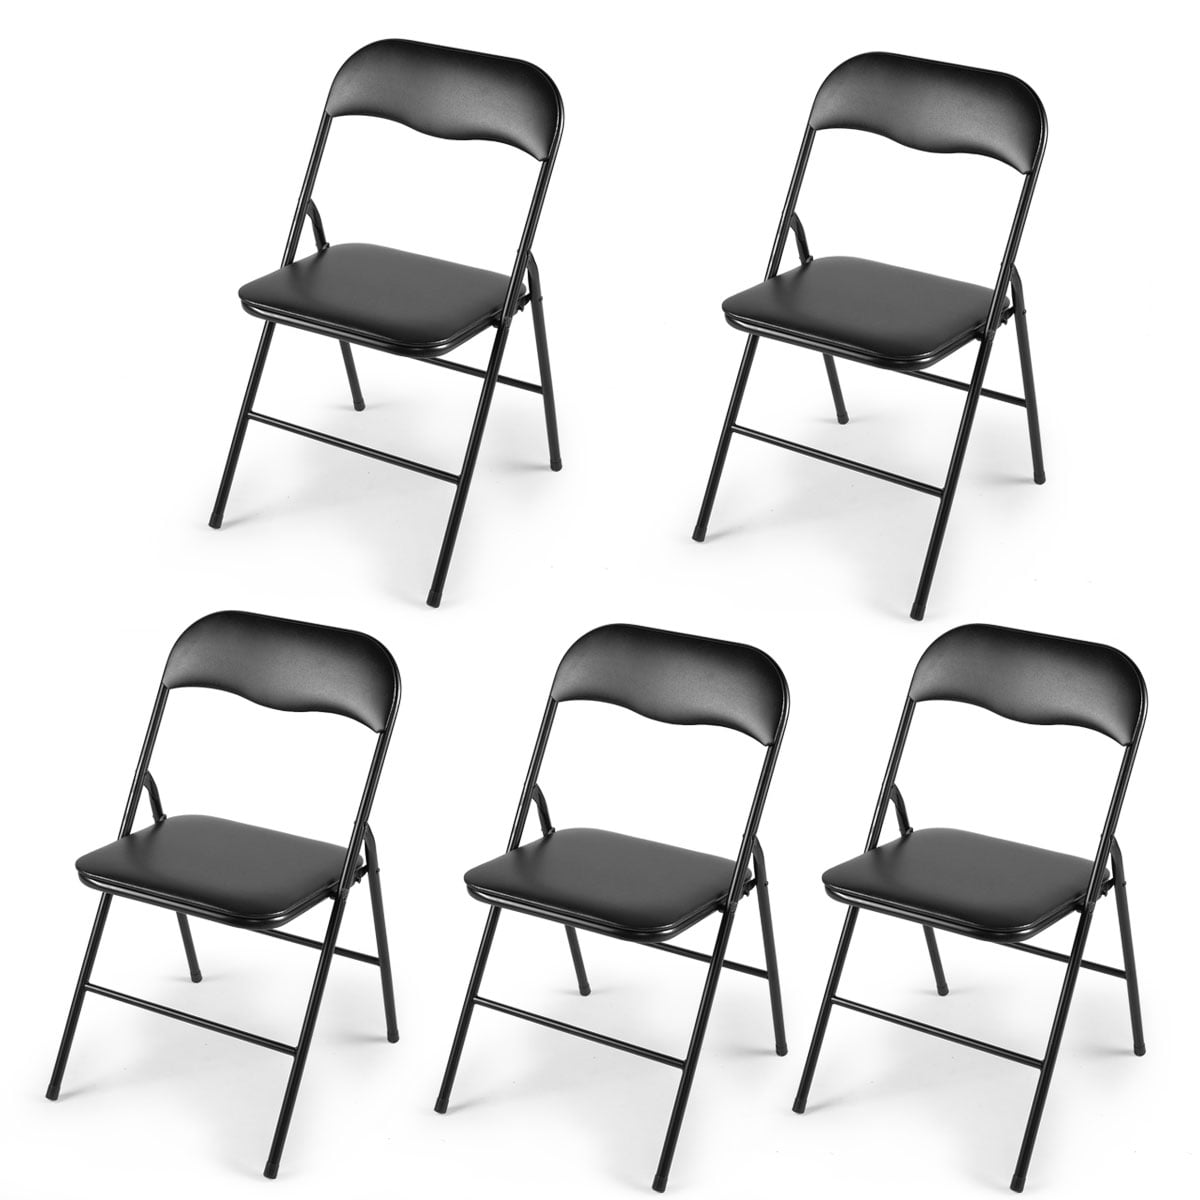 New 5 Pcs Commercial Wedding Quality Stackable Plastic Folding Chairs Black 